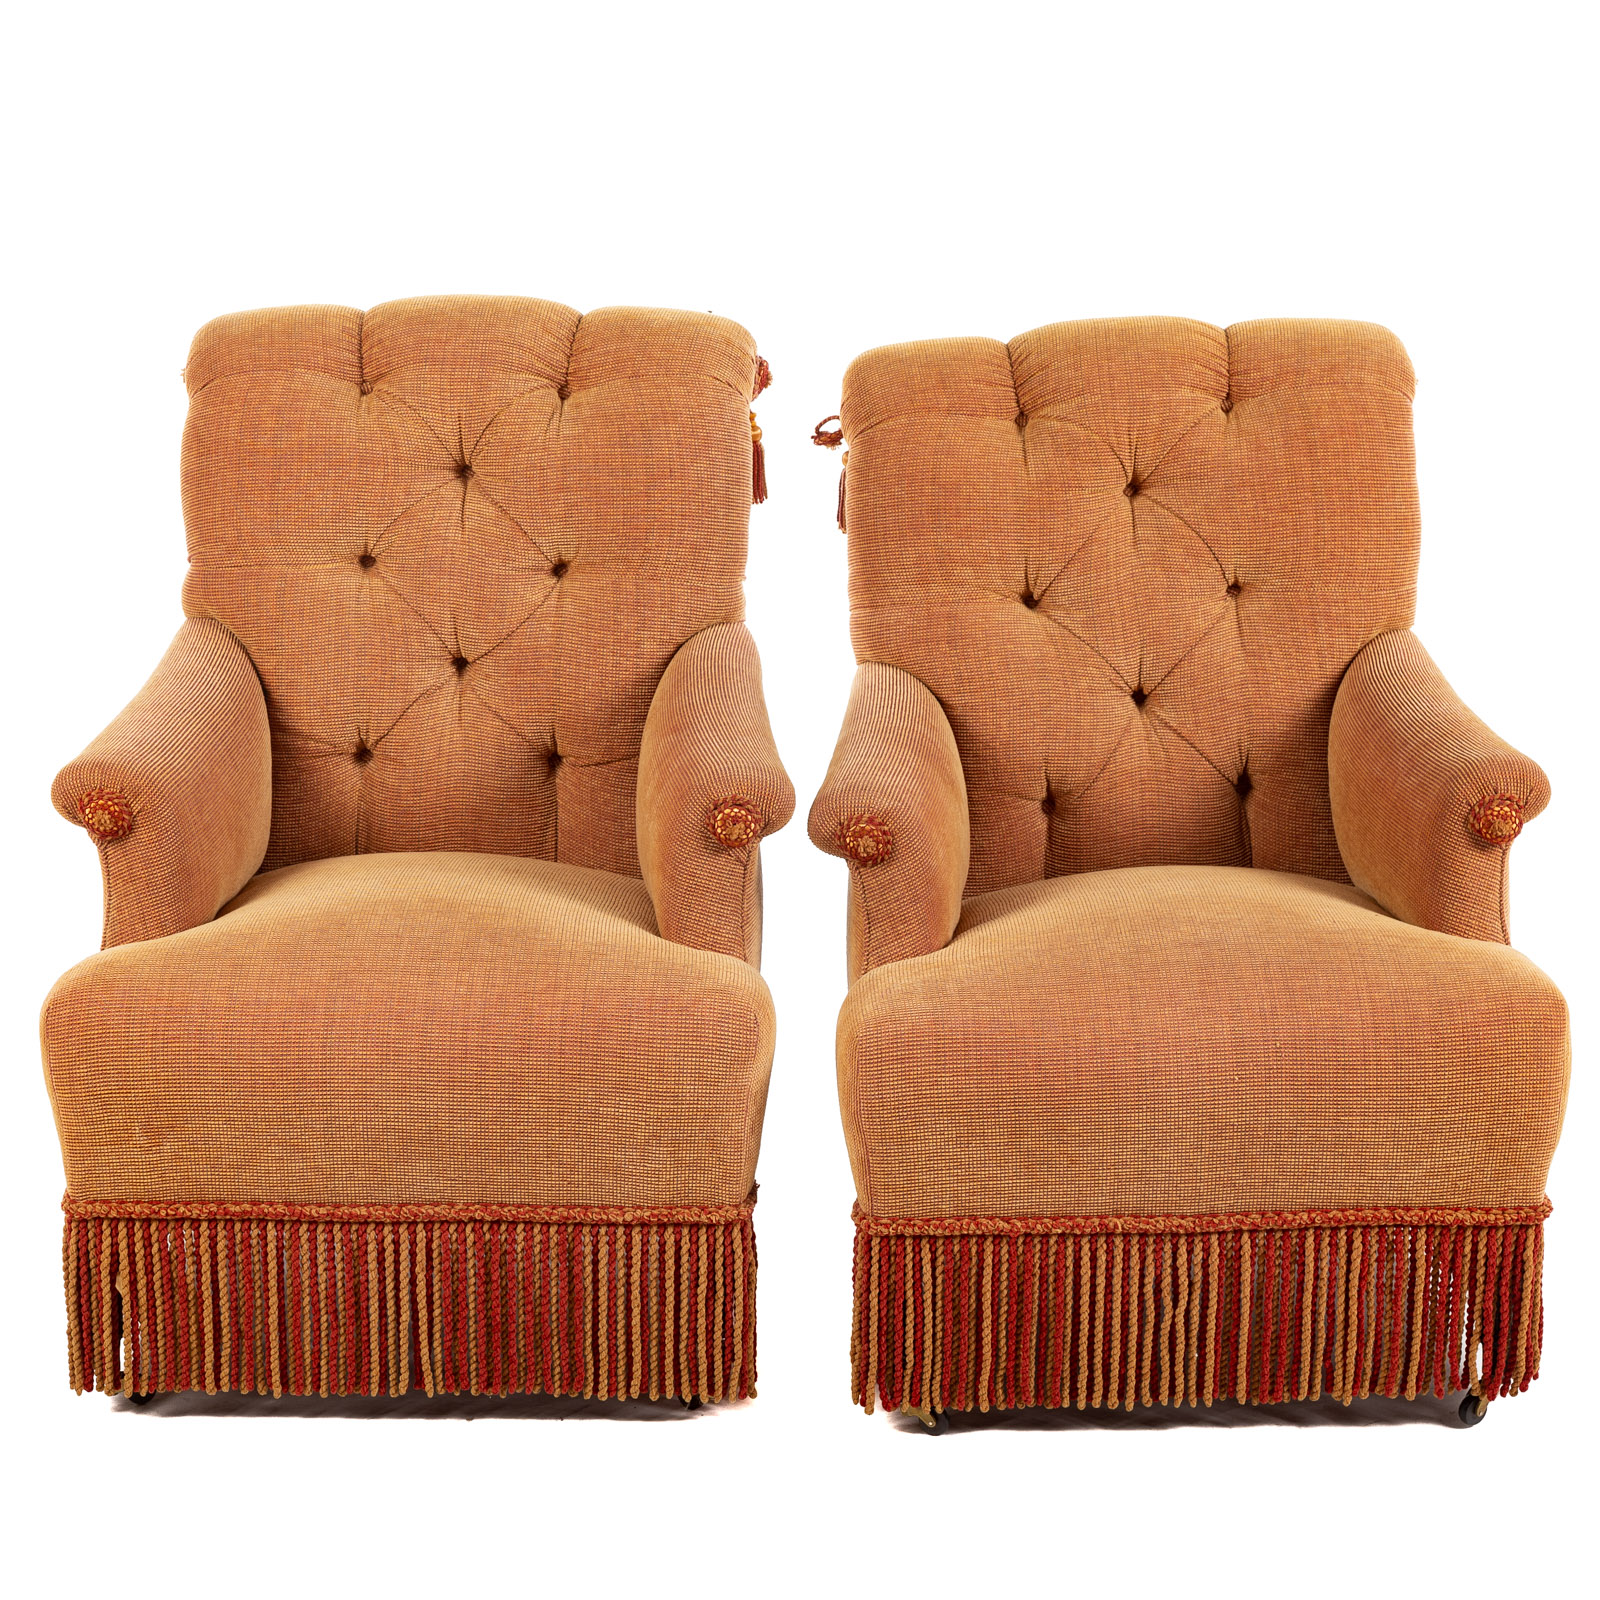 A PAIR OF TUFTED UPHOLSTERED OCCASIONAL 2e9910